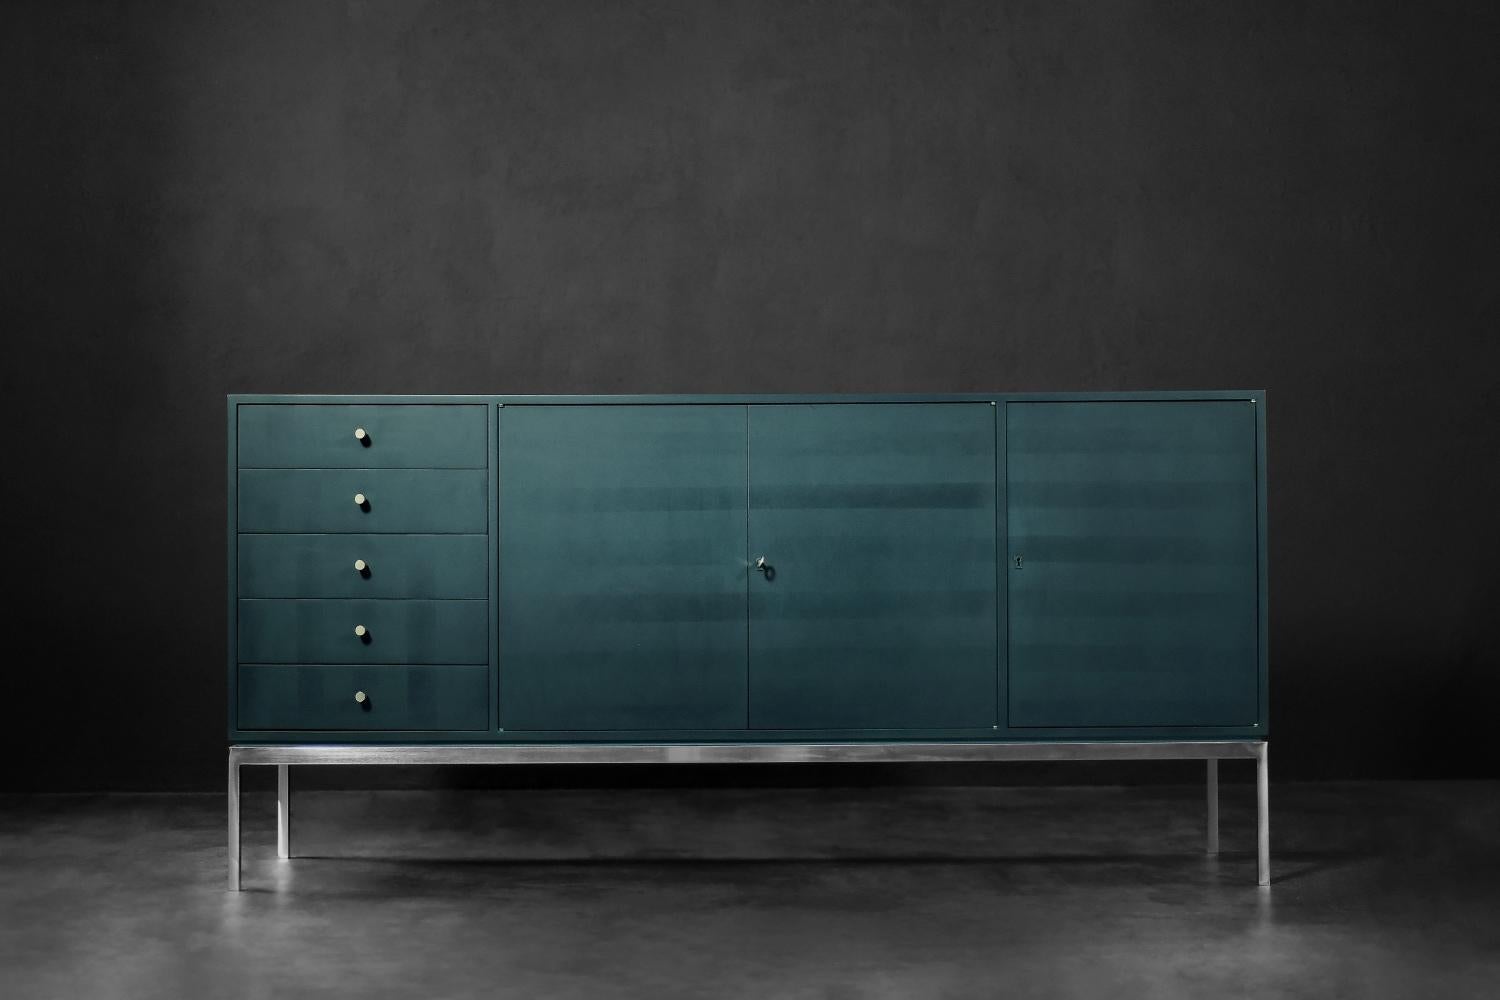 This tall sideboard was made in Germany during the 1970s. It has five drawers and two lockable cabinets with shelves. The base is a rectangular, chrome-plated frame. The cabinet combines high functionality and original appearance. It was covered